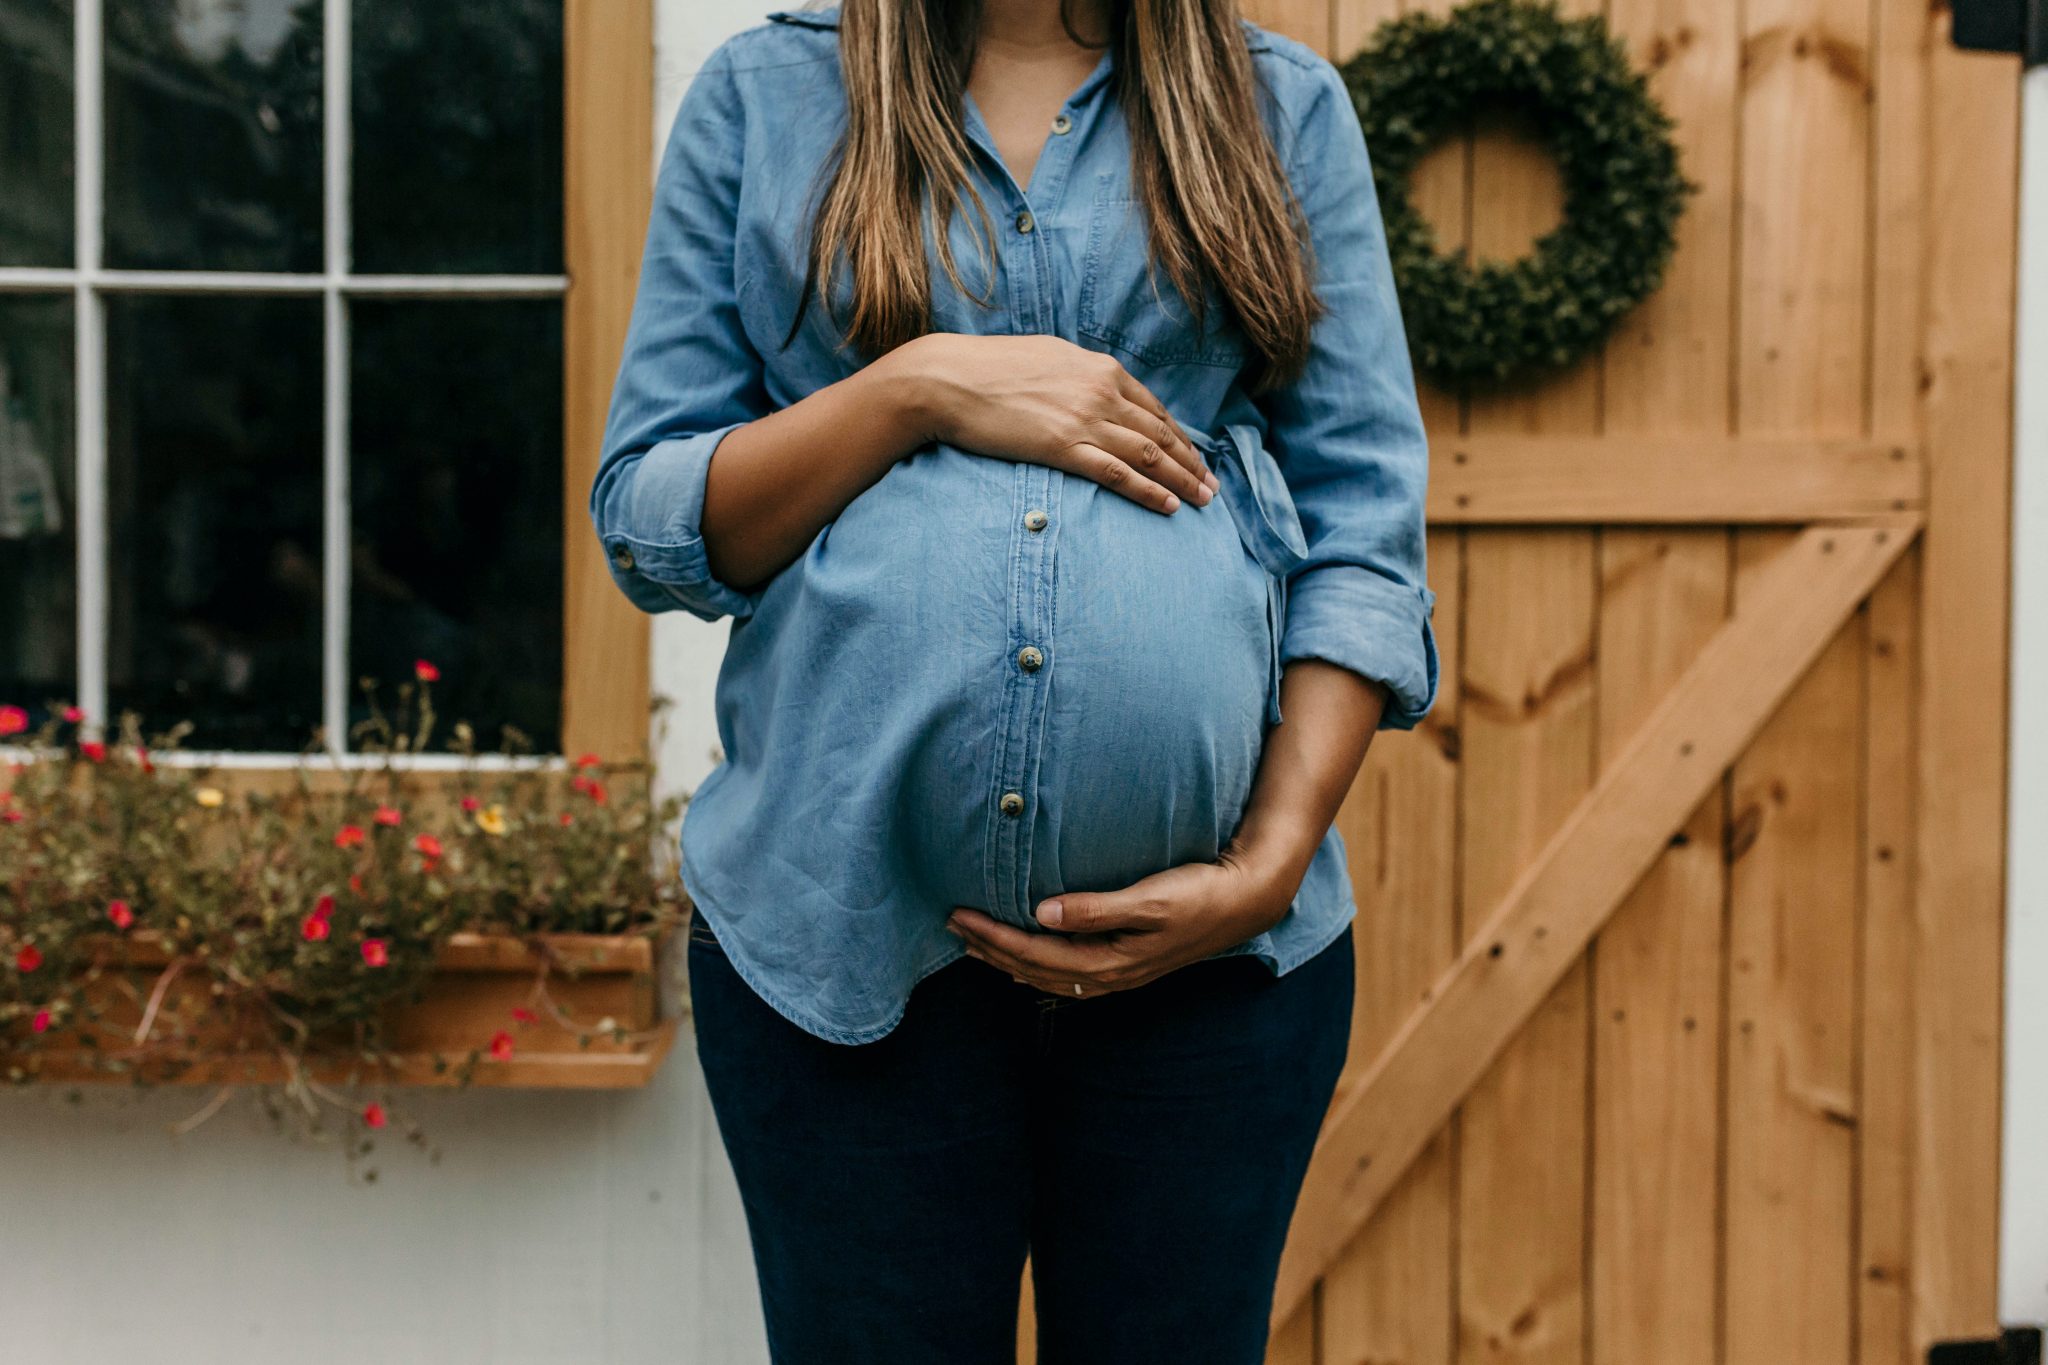 Birth Baby woman in blue denim button up jacket and blue denim jeans standing near brown wooden fence